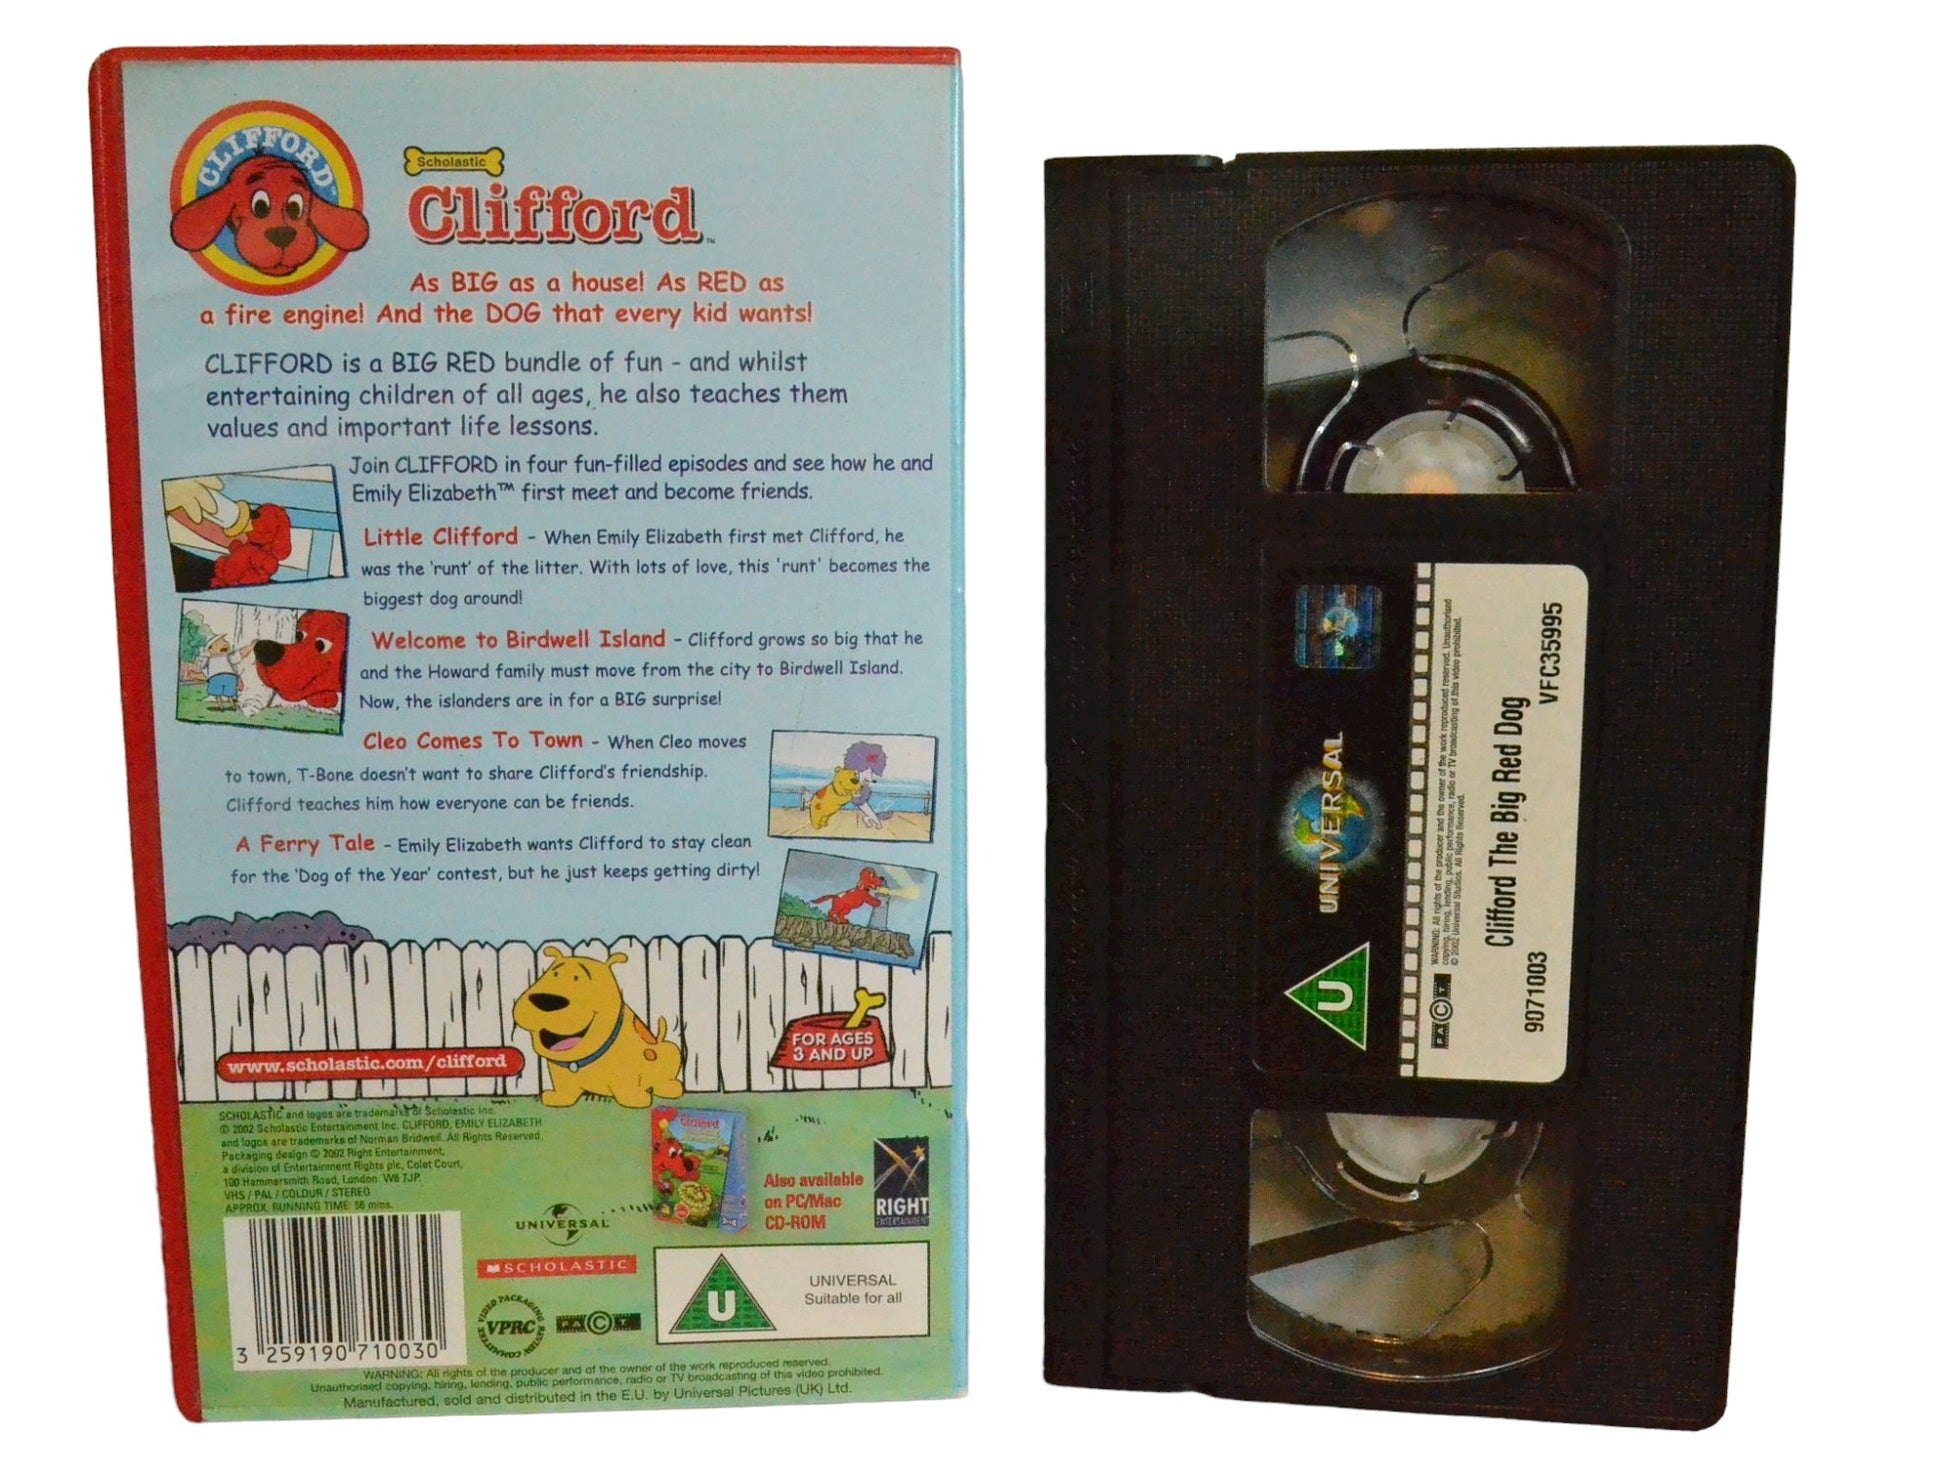 Clifford The Big Red Dog - Darby Camp - Right Entertainment - Childrens - PAL - VHS-